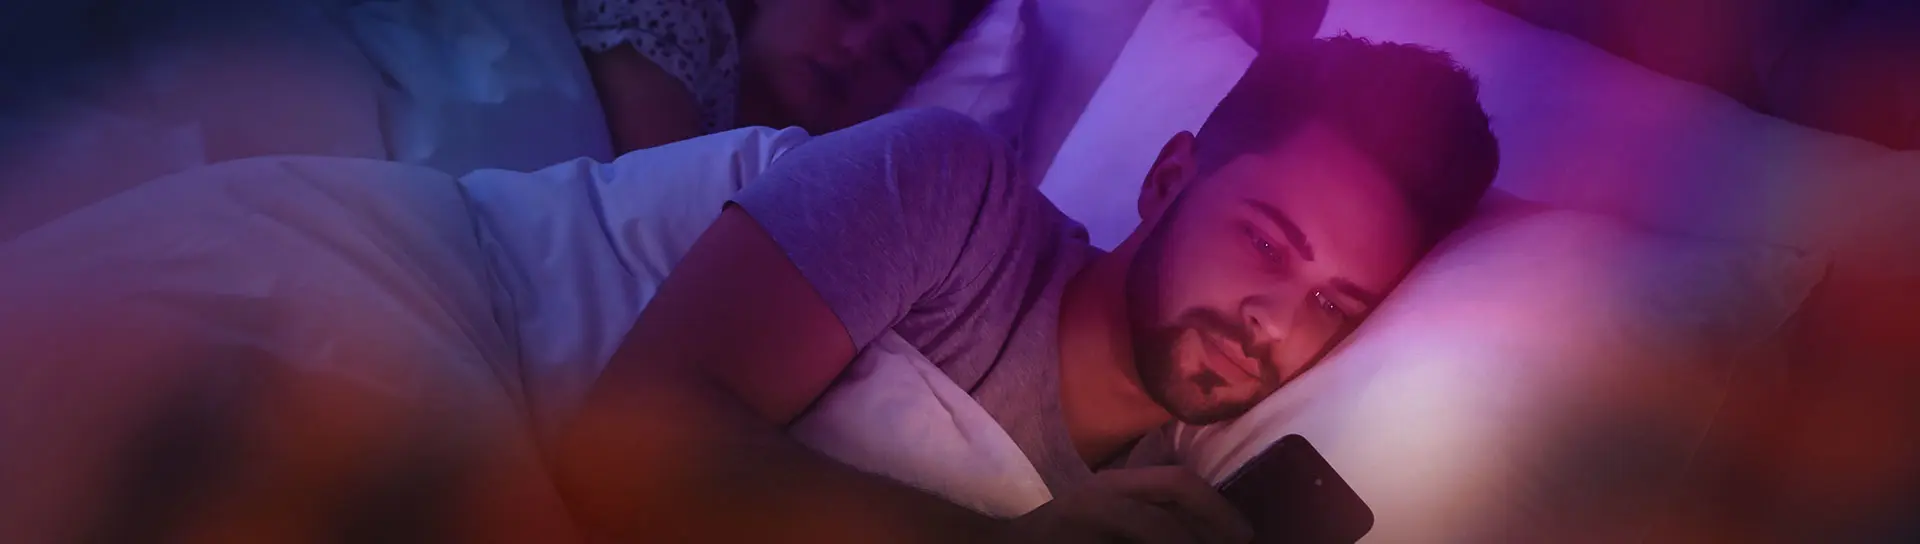 Young man using smartphone while his girlfriend sleeping in bed at night.